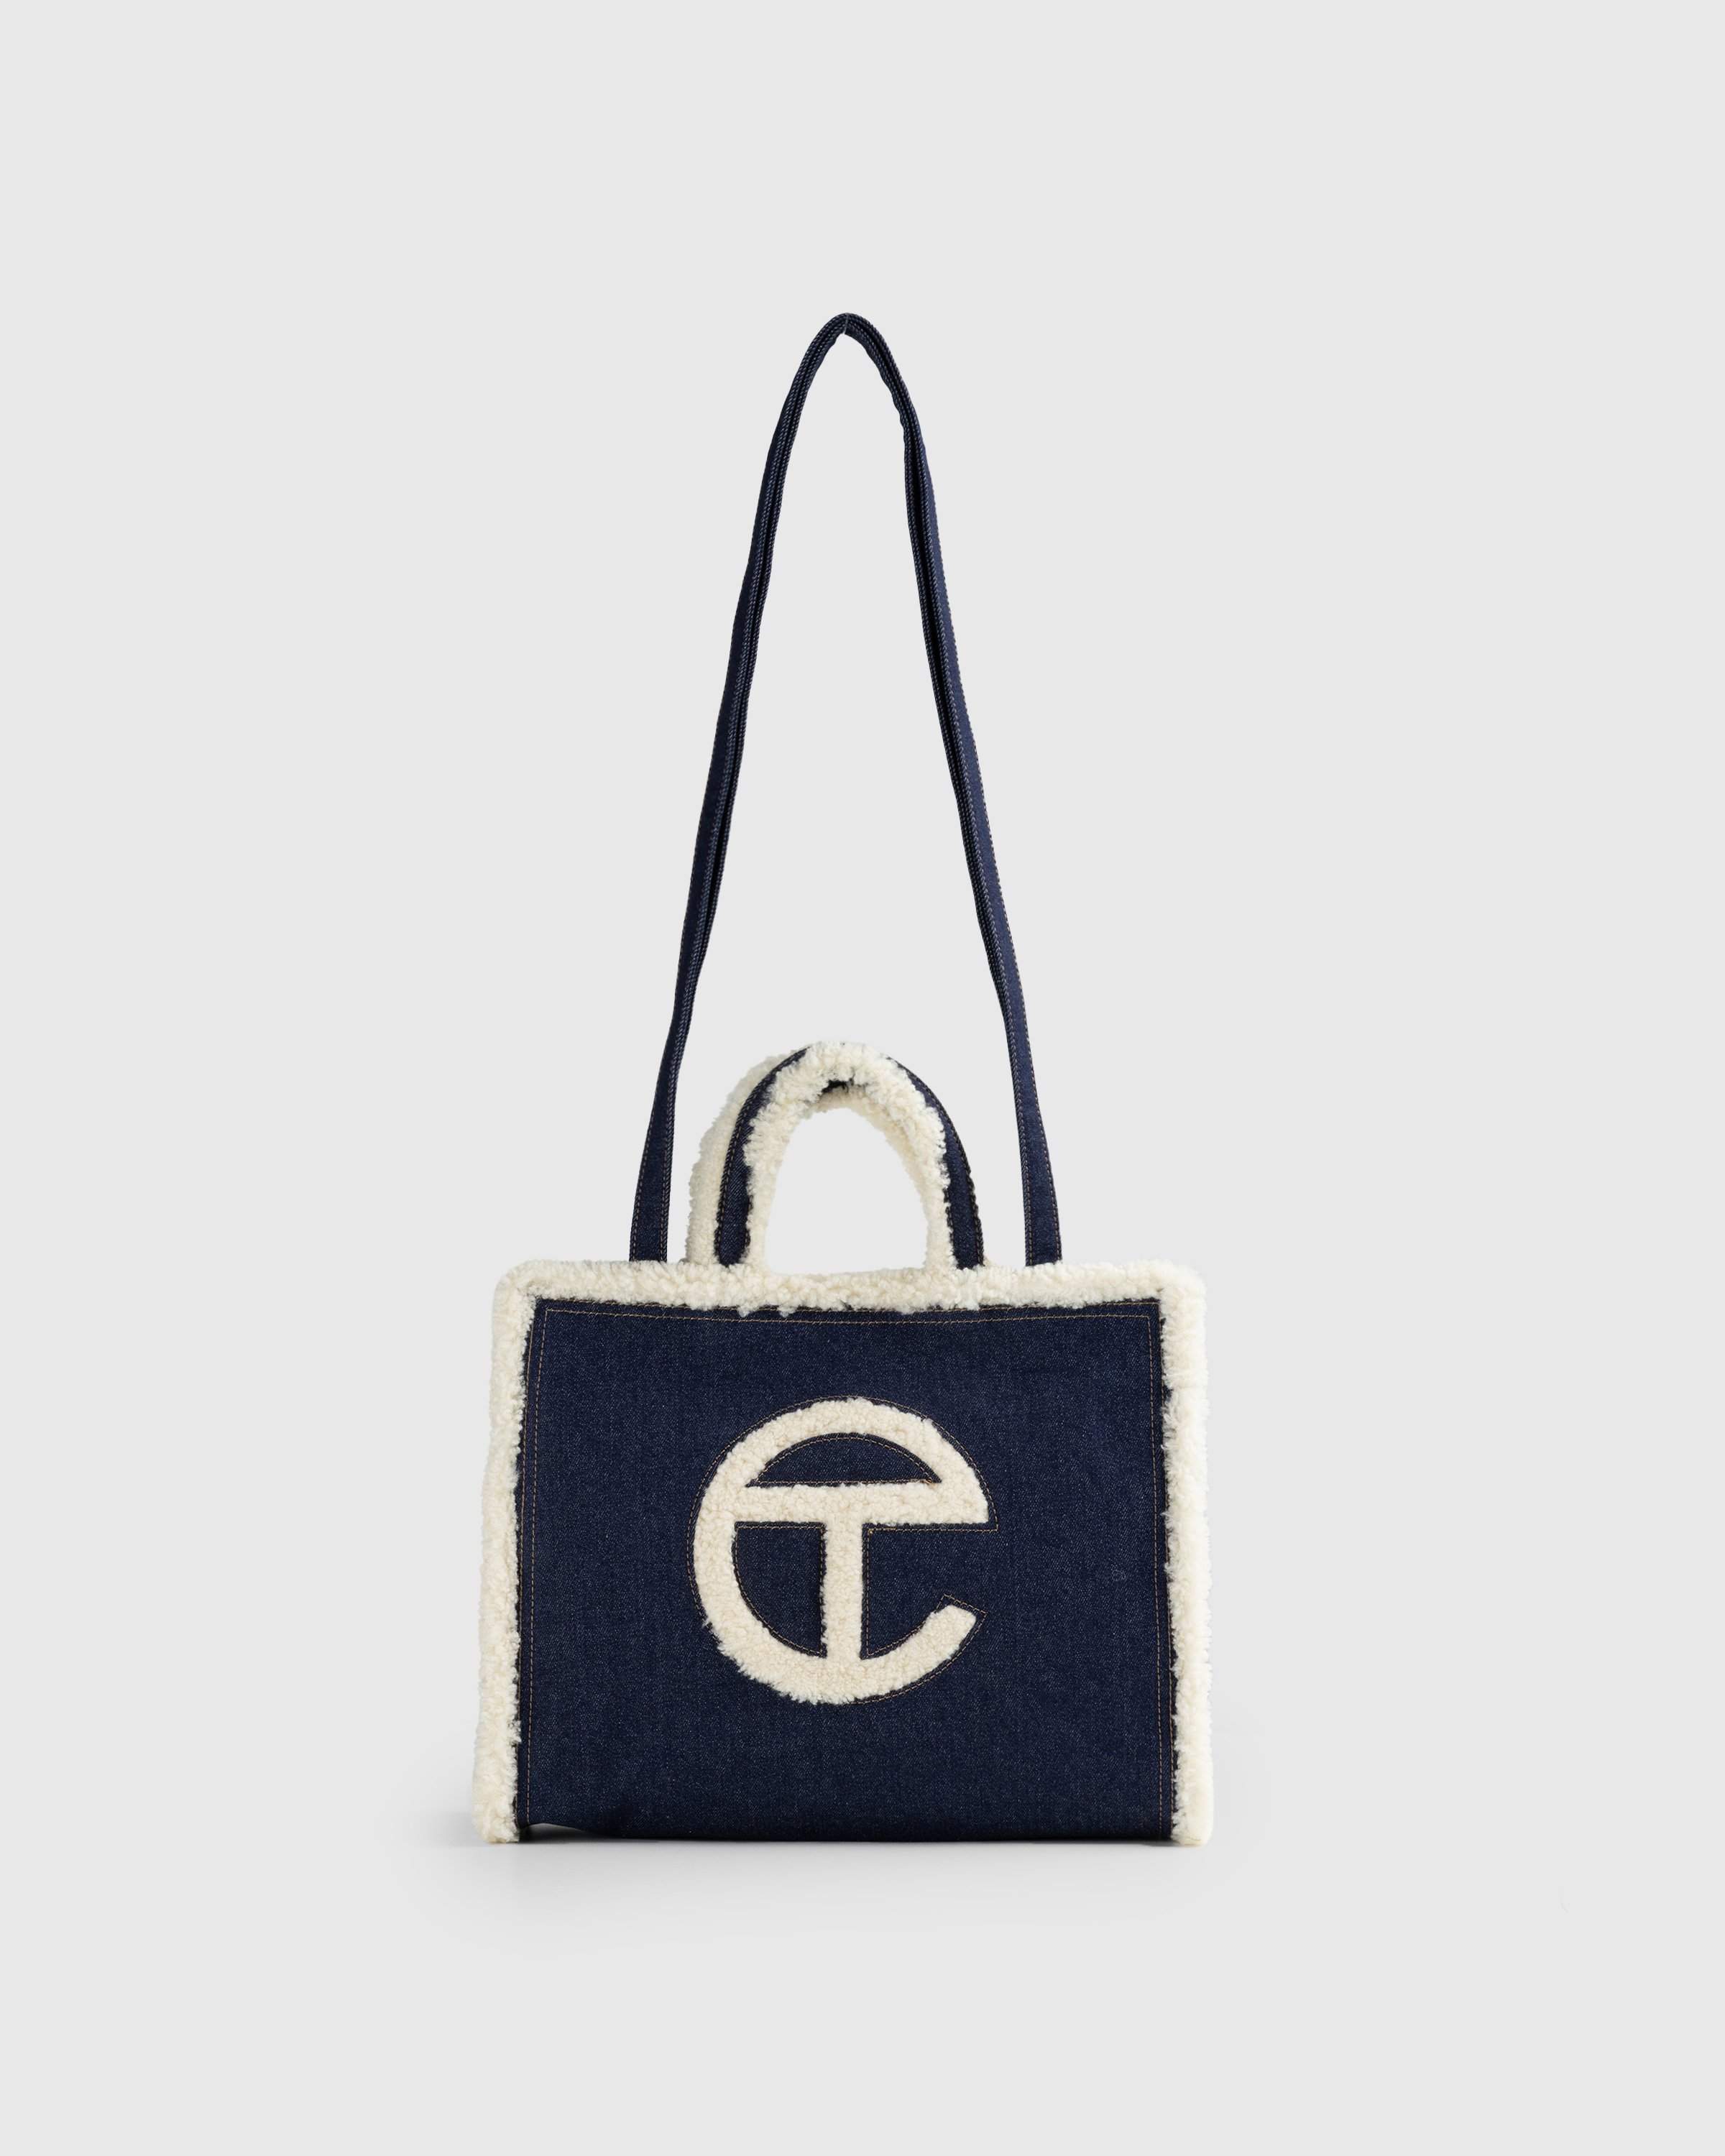 Telfar and UGG Unveil New Denim Bags and Apparel